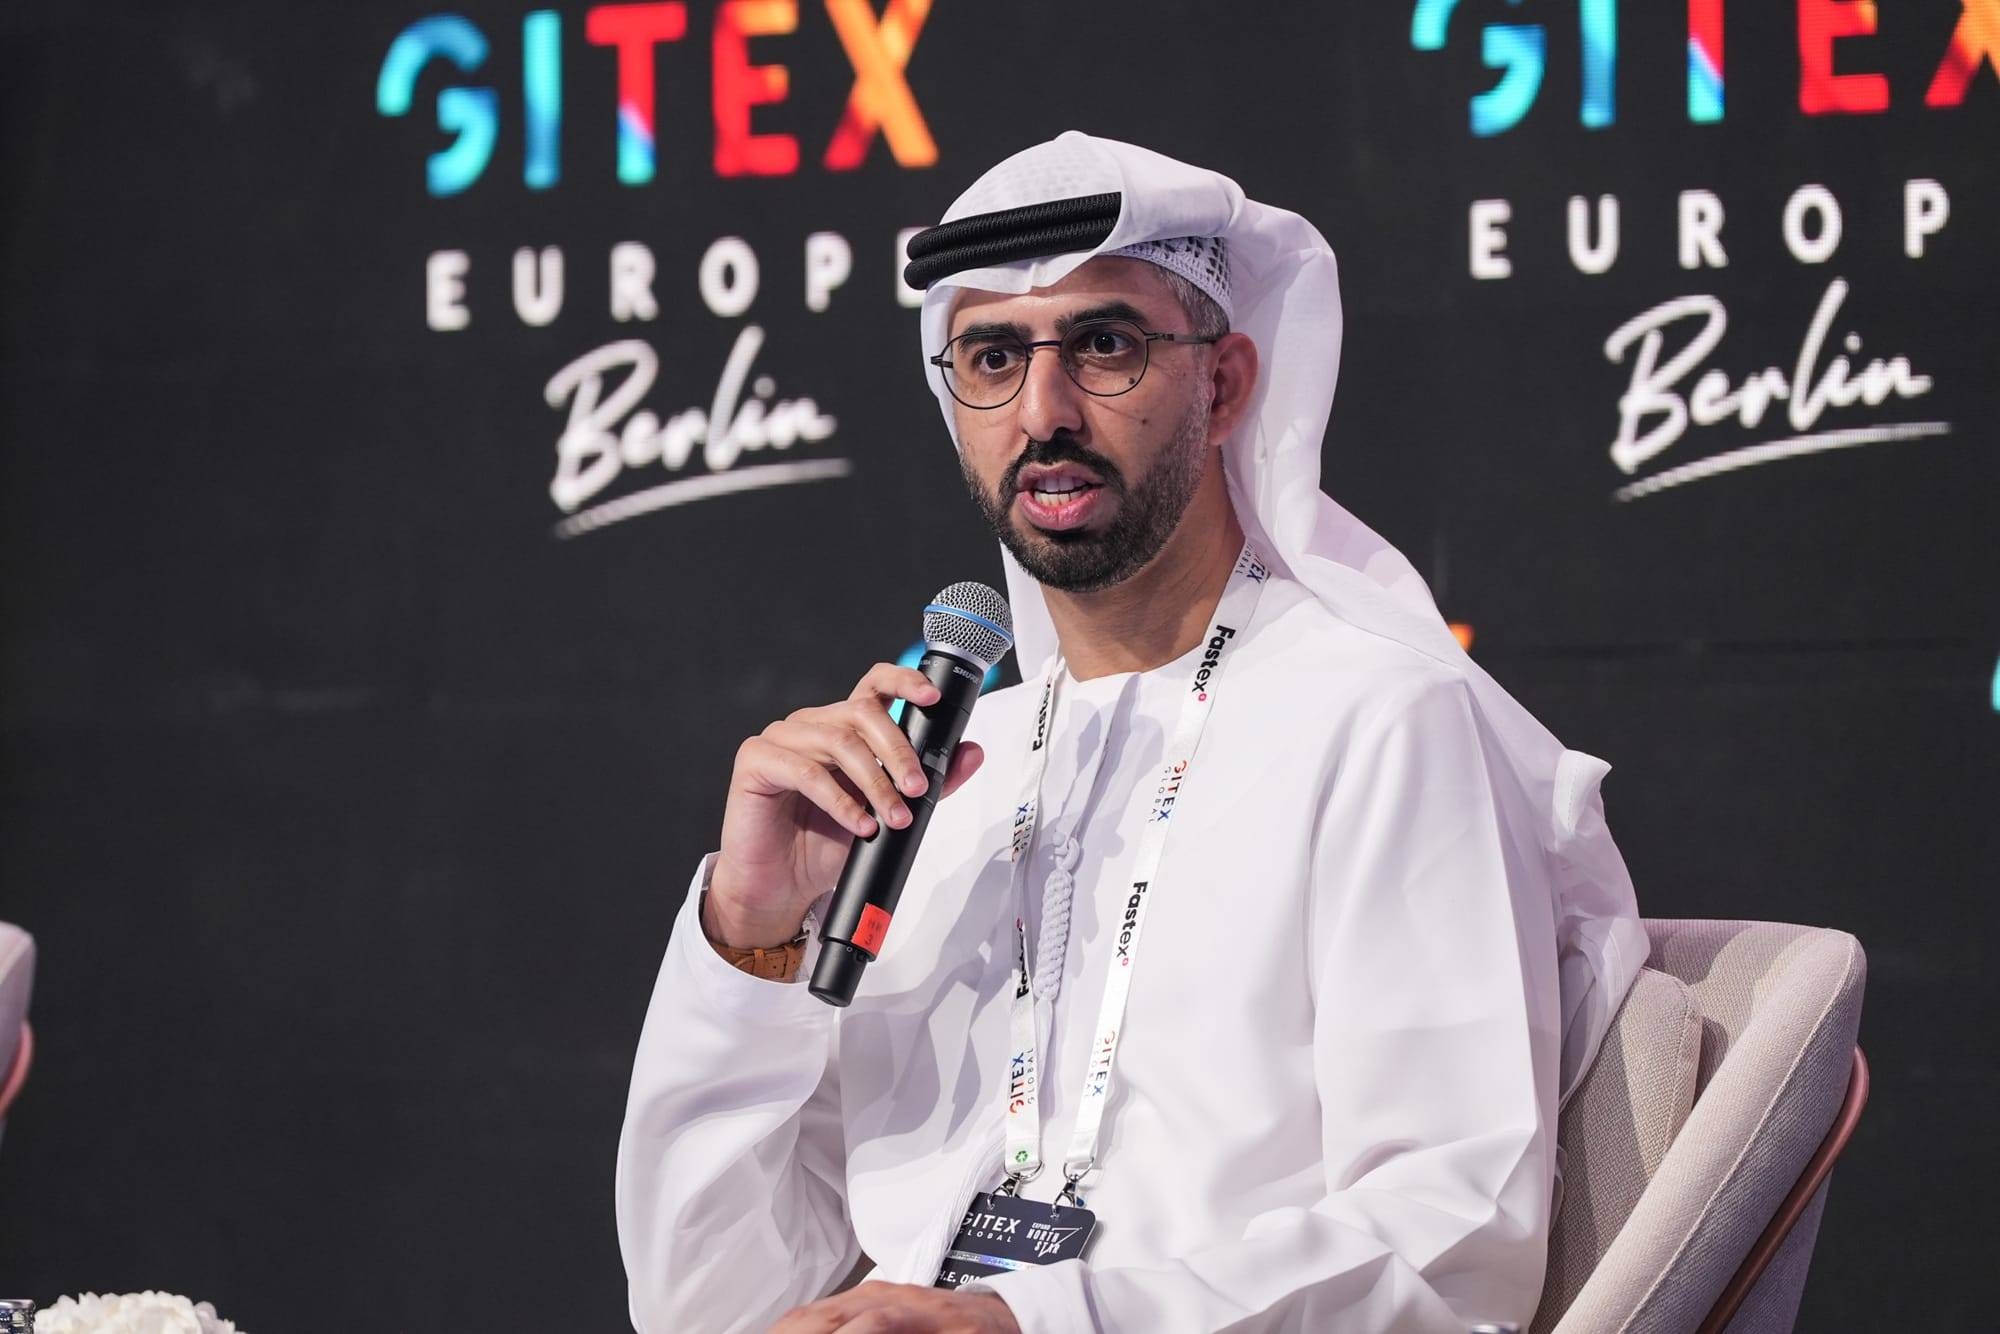 GITEX's European expansion takes root in Berlin